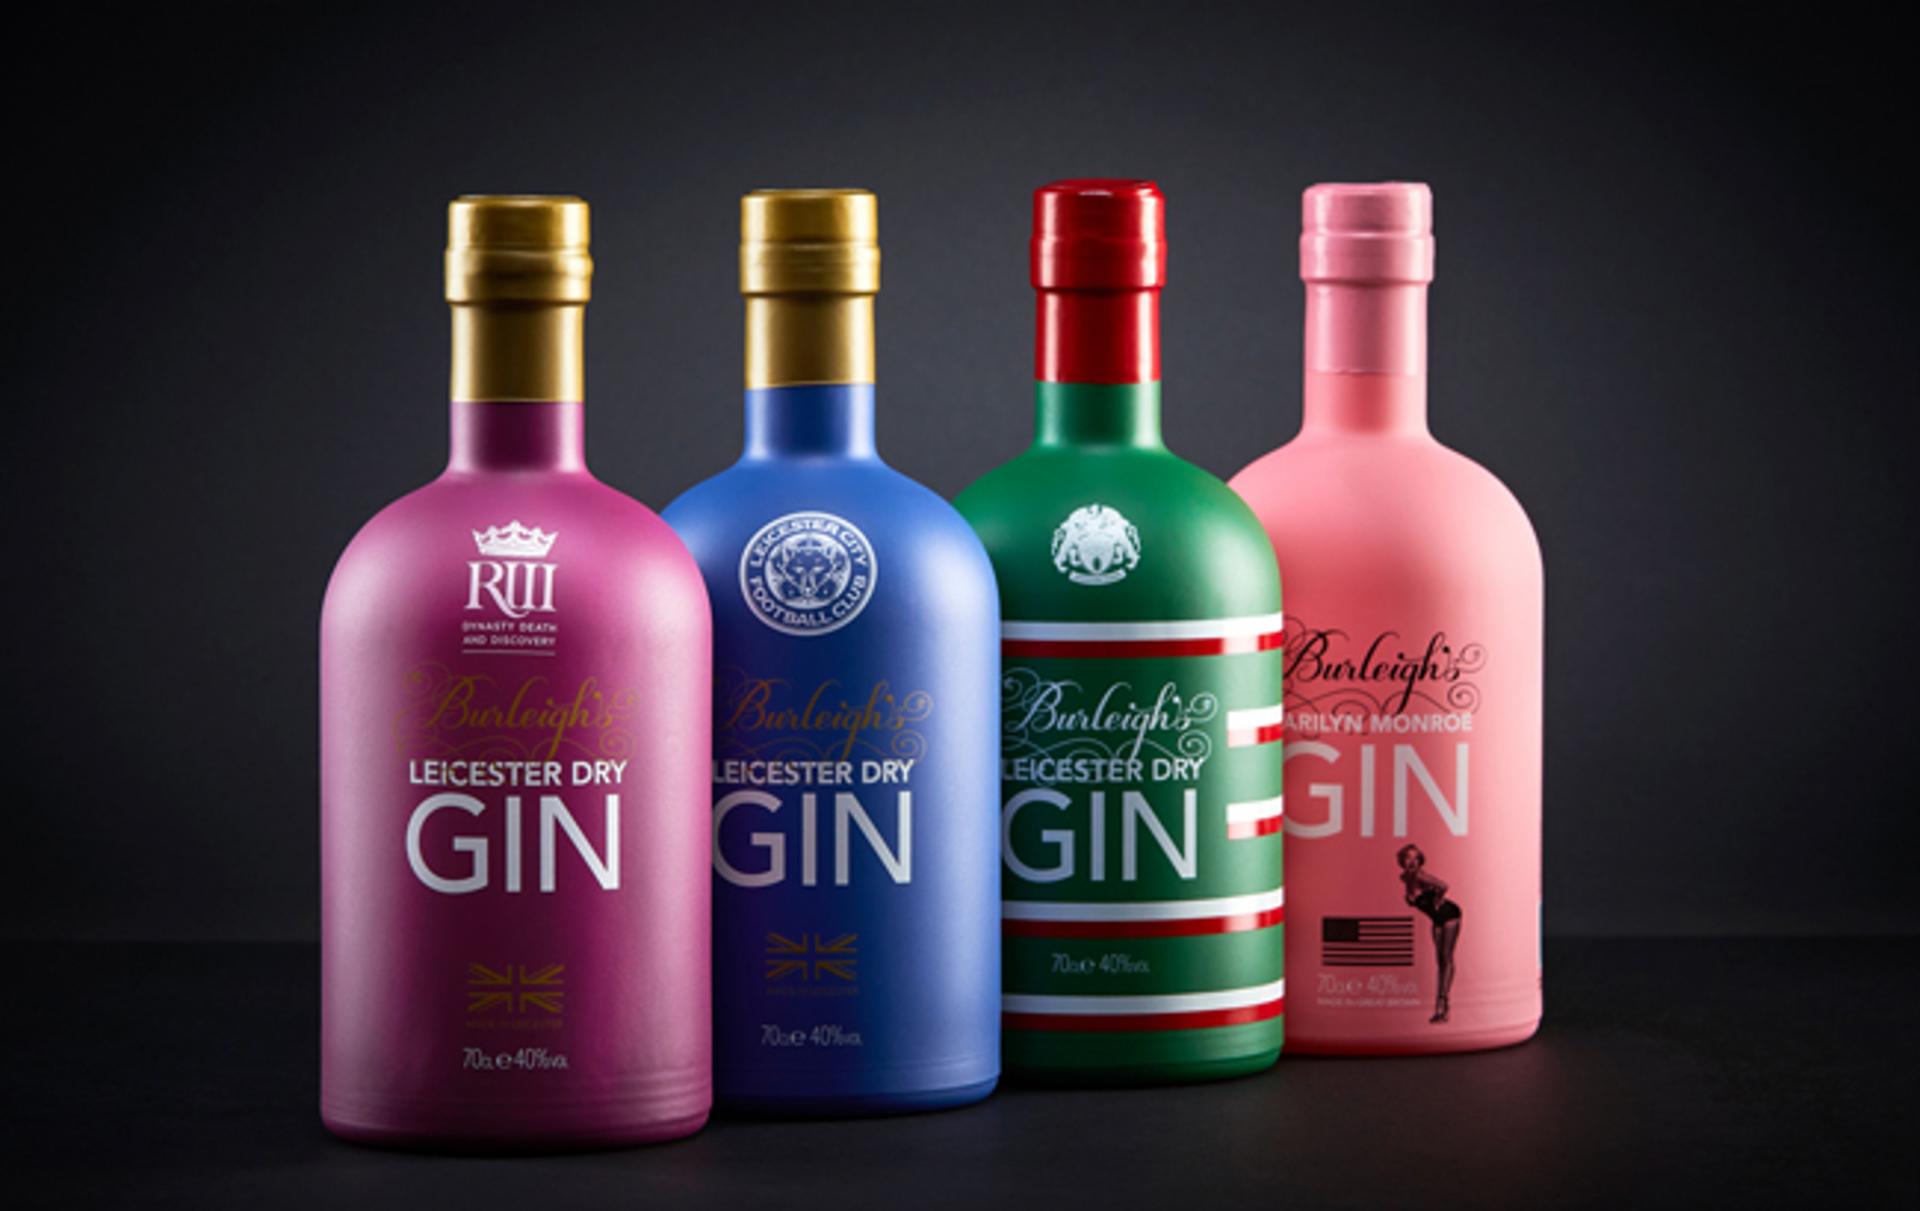 Administrators still hope to find buyer for gin firm